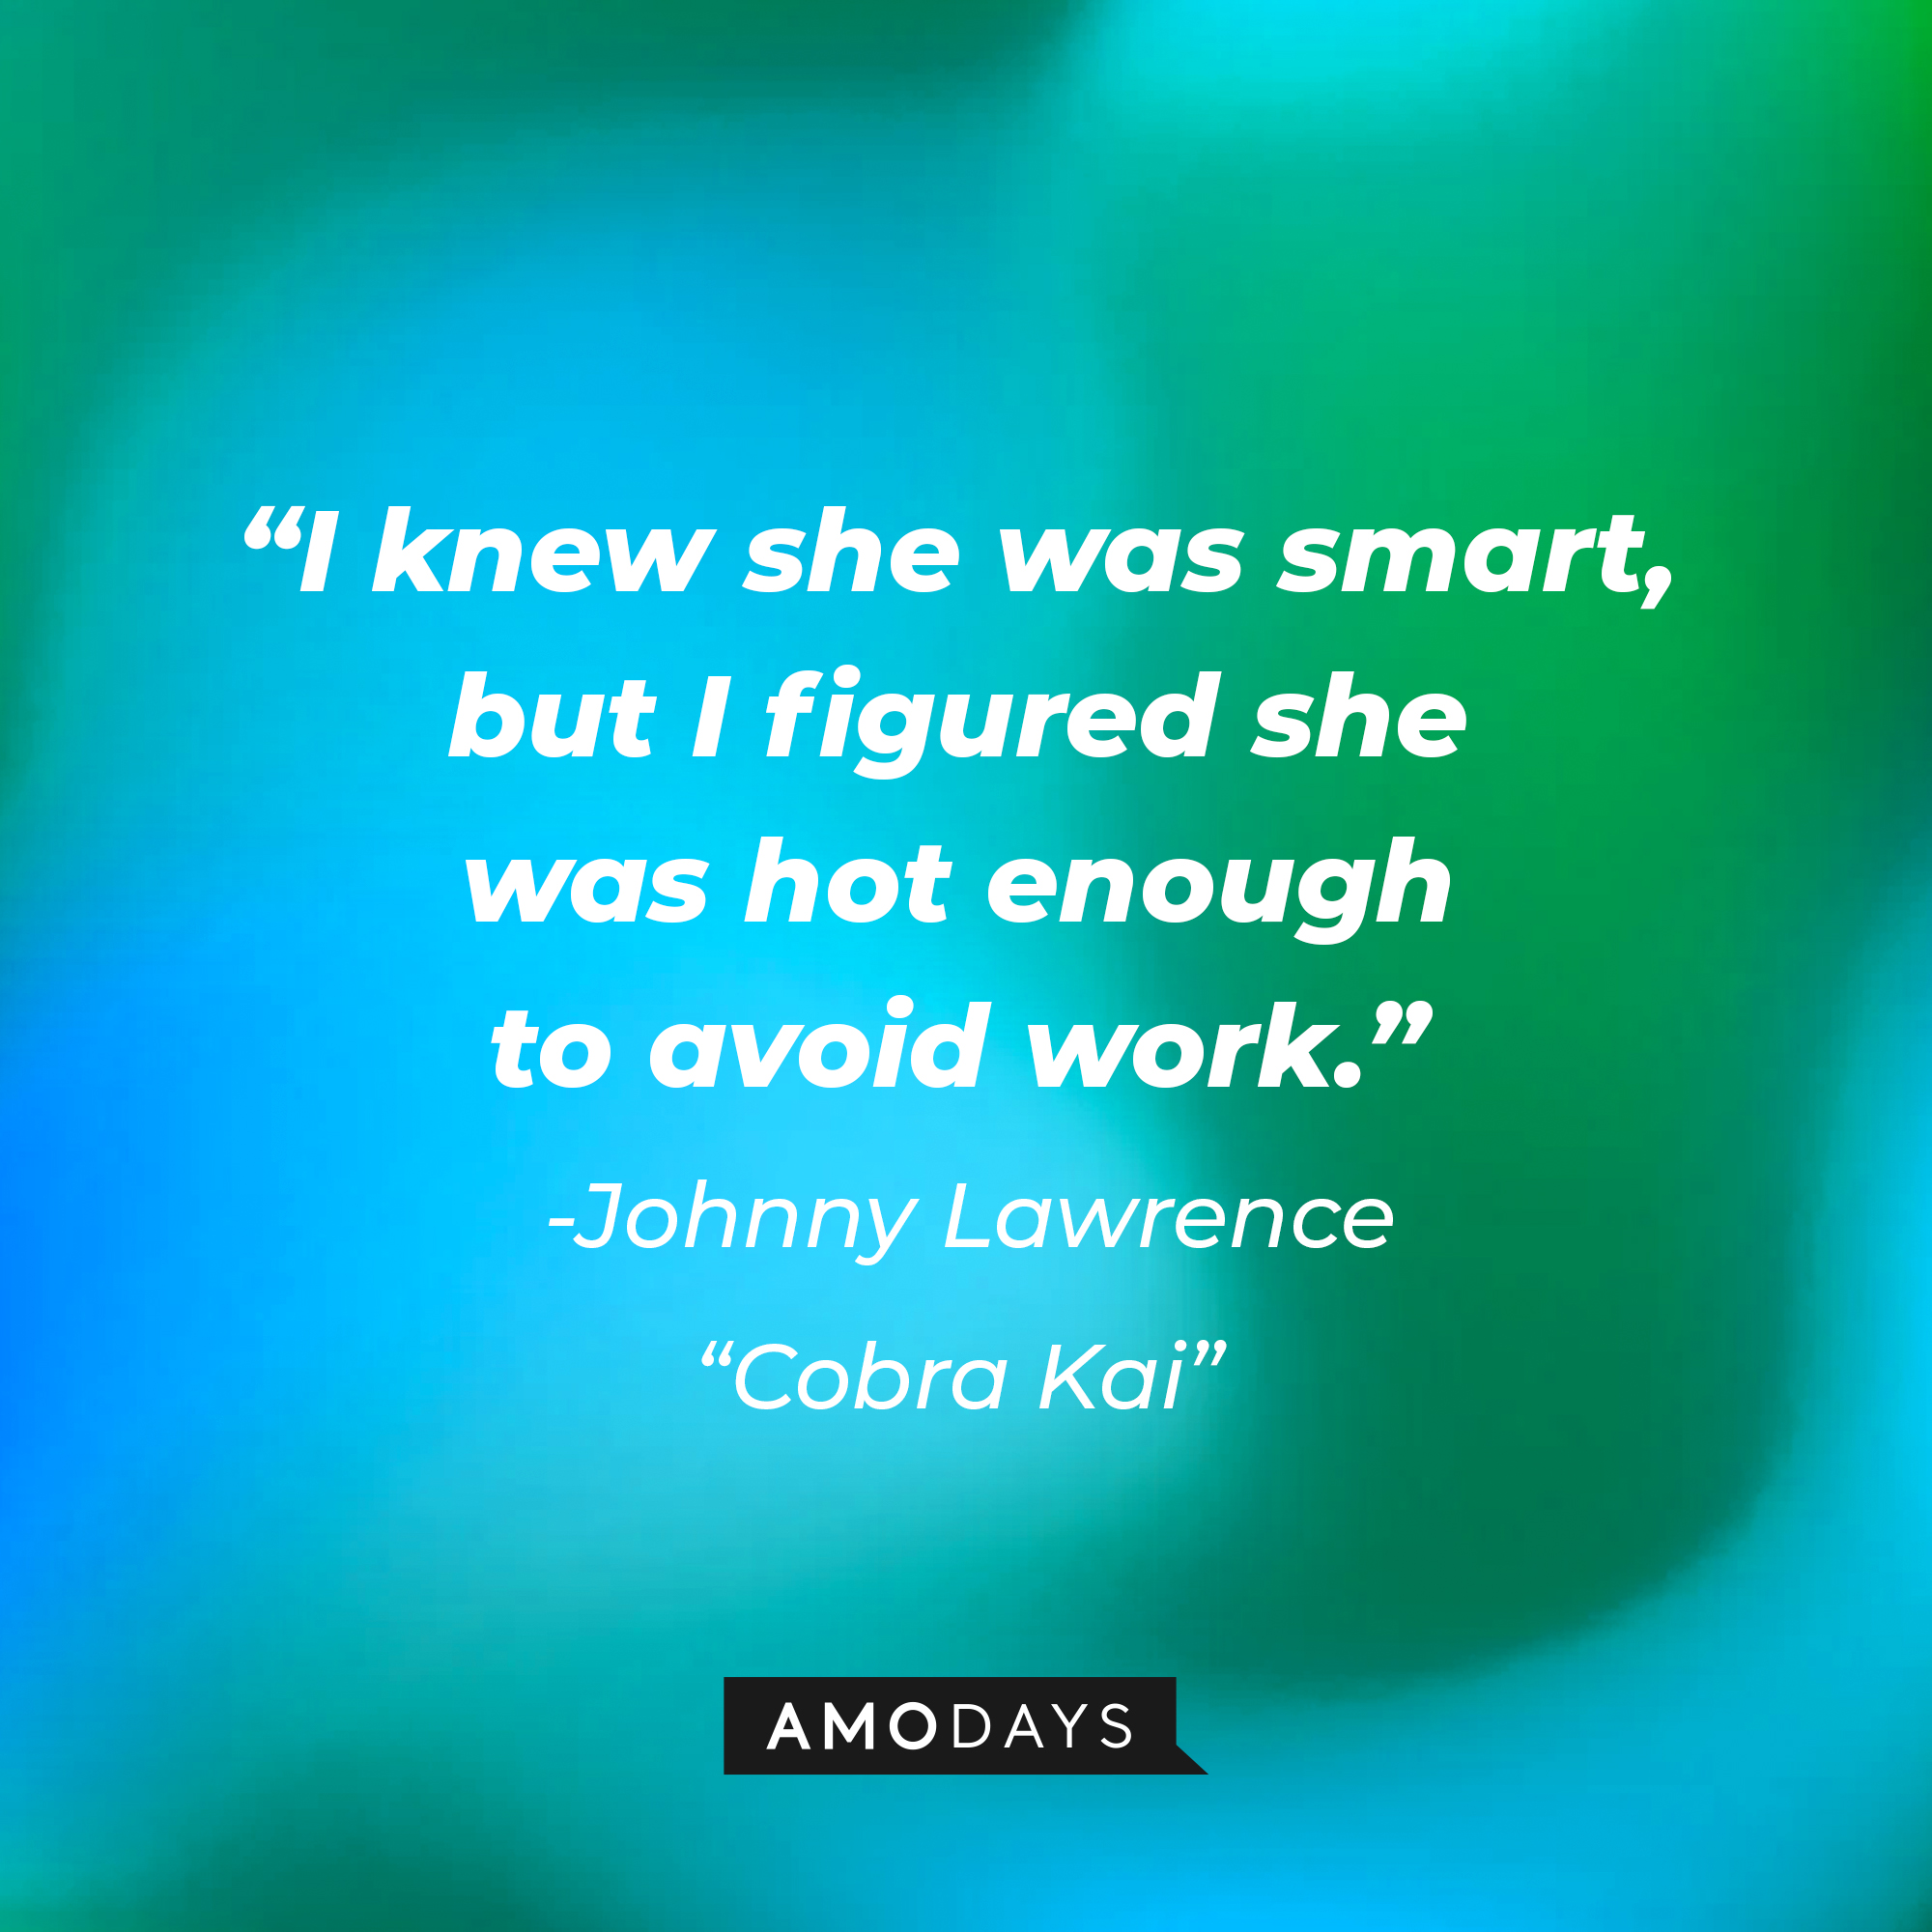 Johnny Lawrence's quote from "Cobra Kai:" “I knew she was smart, but I figured she was hot enough to avoid work.” | Source: AmoDays